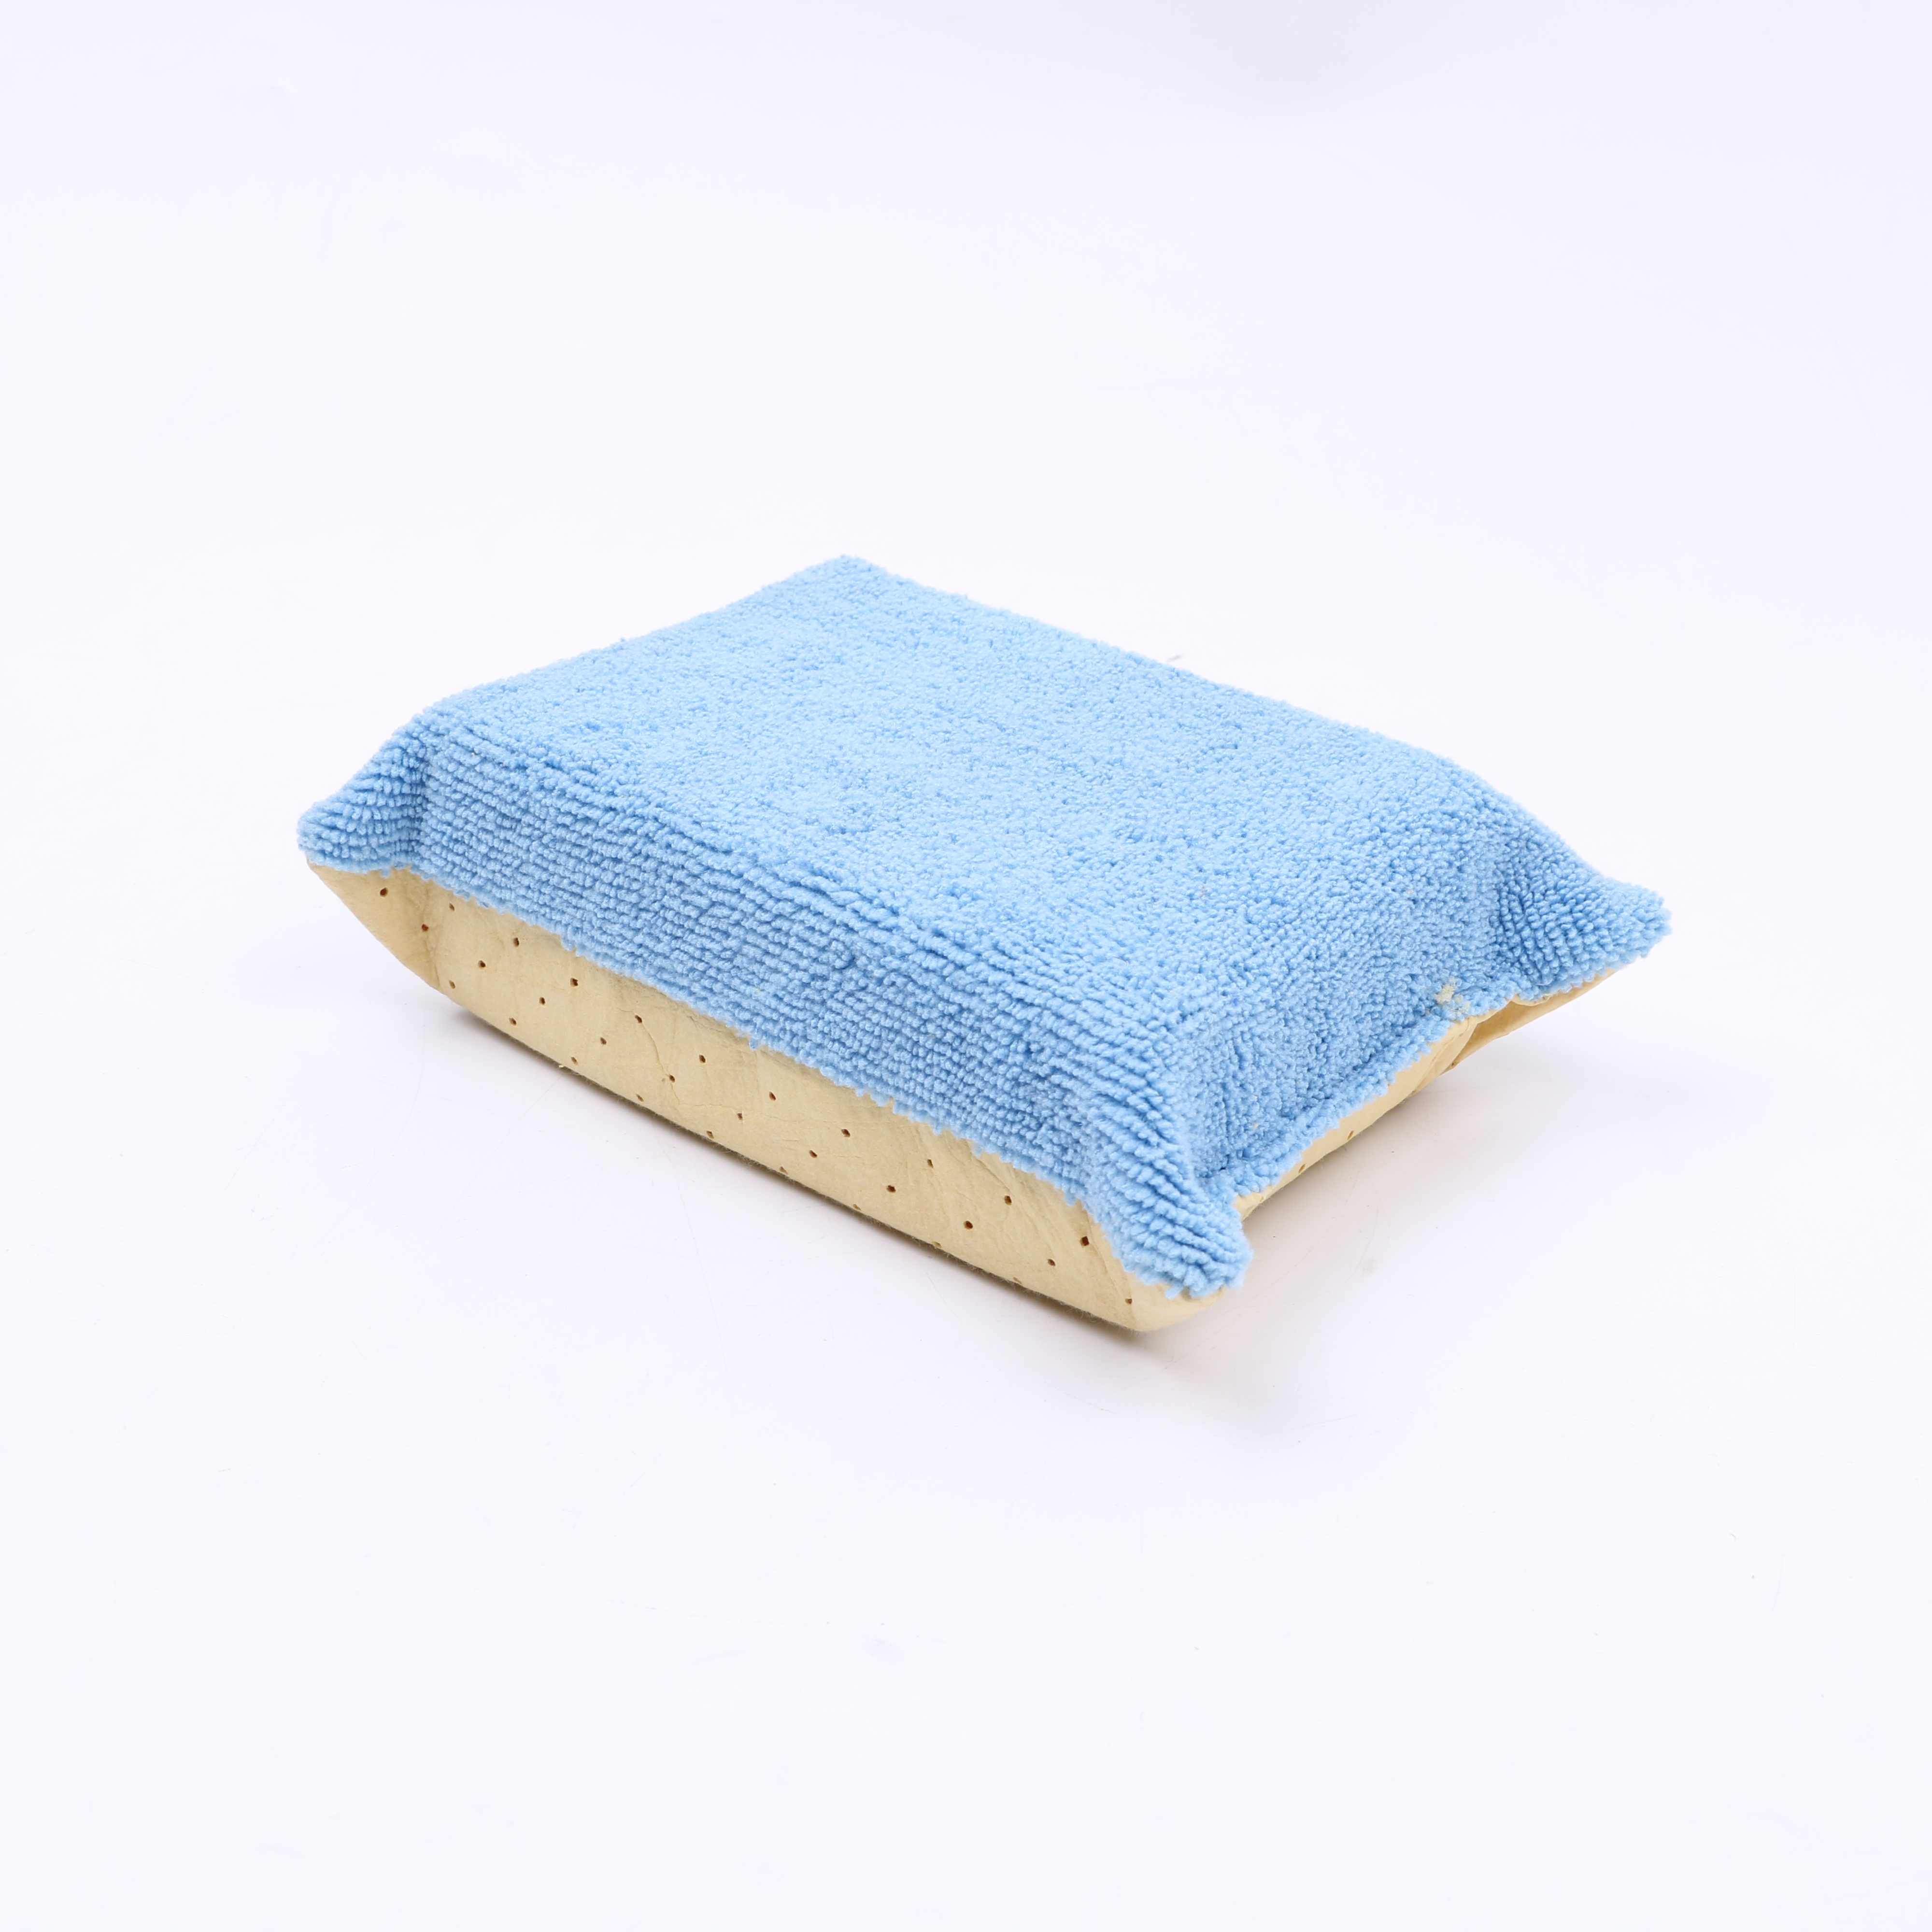 Wholesale Microfiber Water Absorb Sponge - Item	Washing sponge Brand	Eastsun(OEM) Weight 31g Color custom Sample Free sample can supply for you to check quality MOQ 10 pieces Delivery time less th...